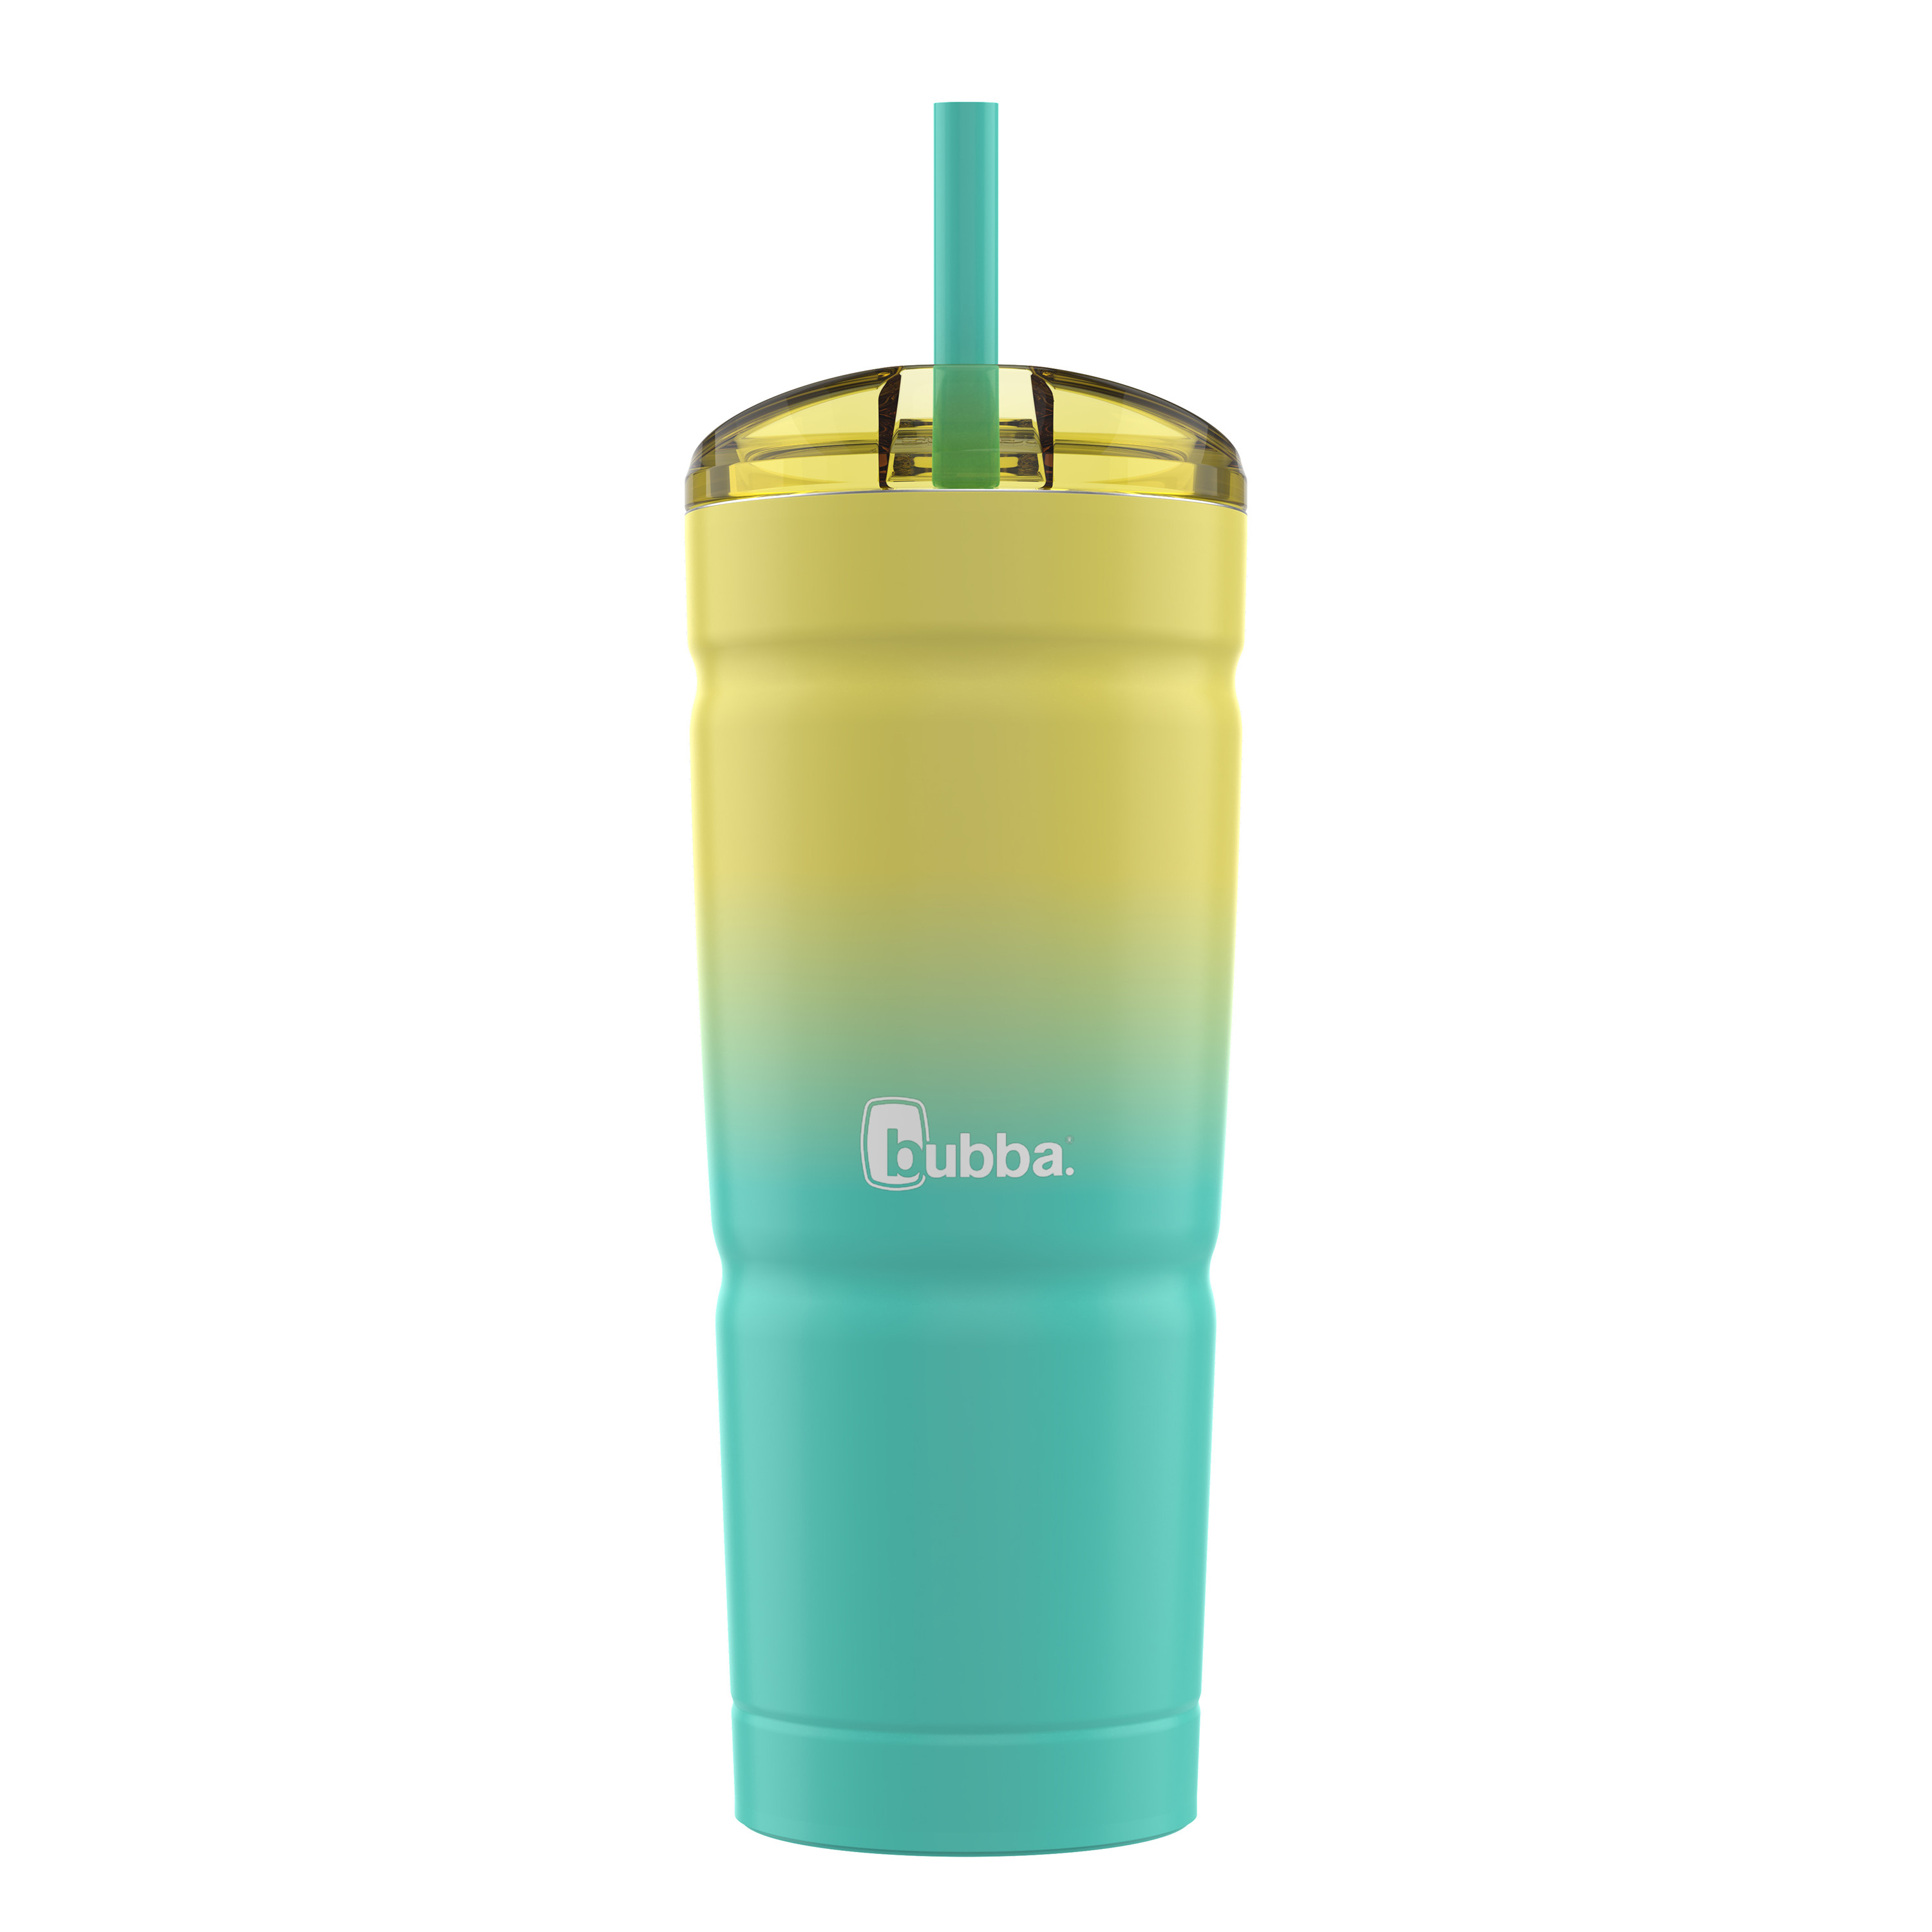 bubba Envy S Insulated Stainless Steel Tumbler with Straw, 24 Oz., Ombre - image 1 of 6